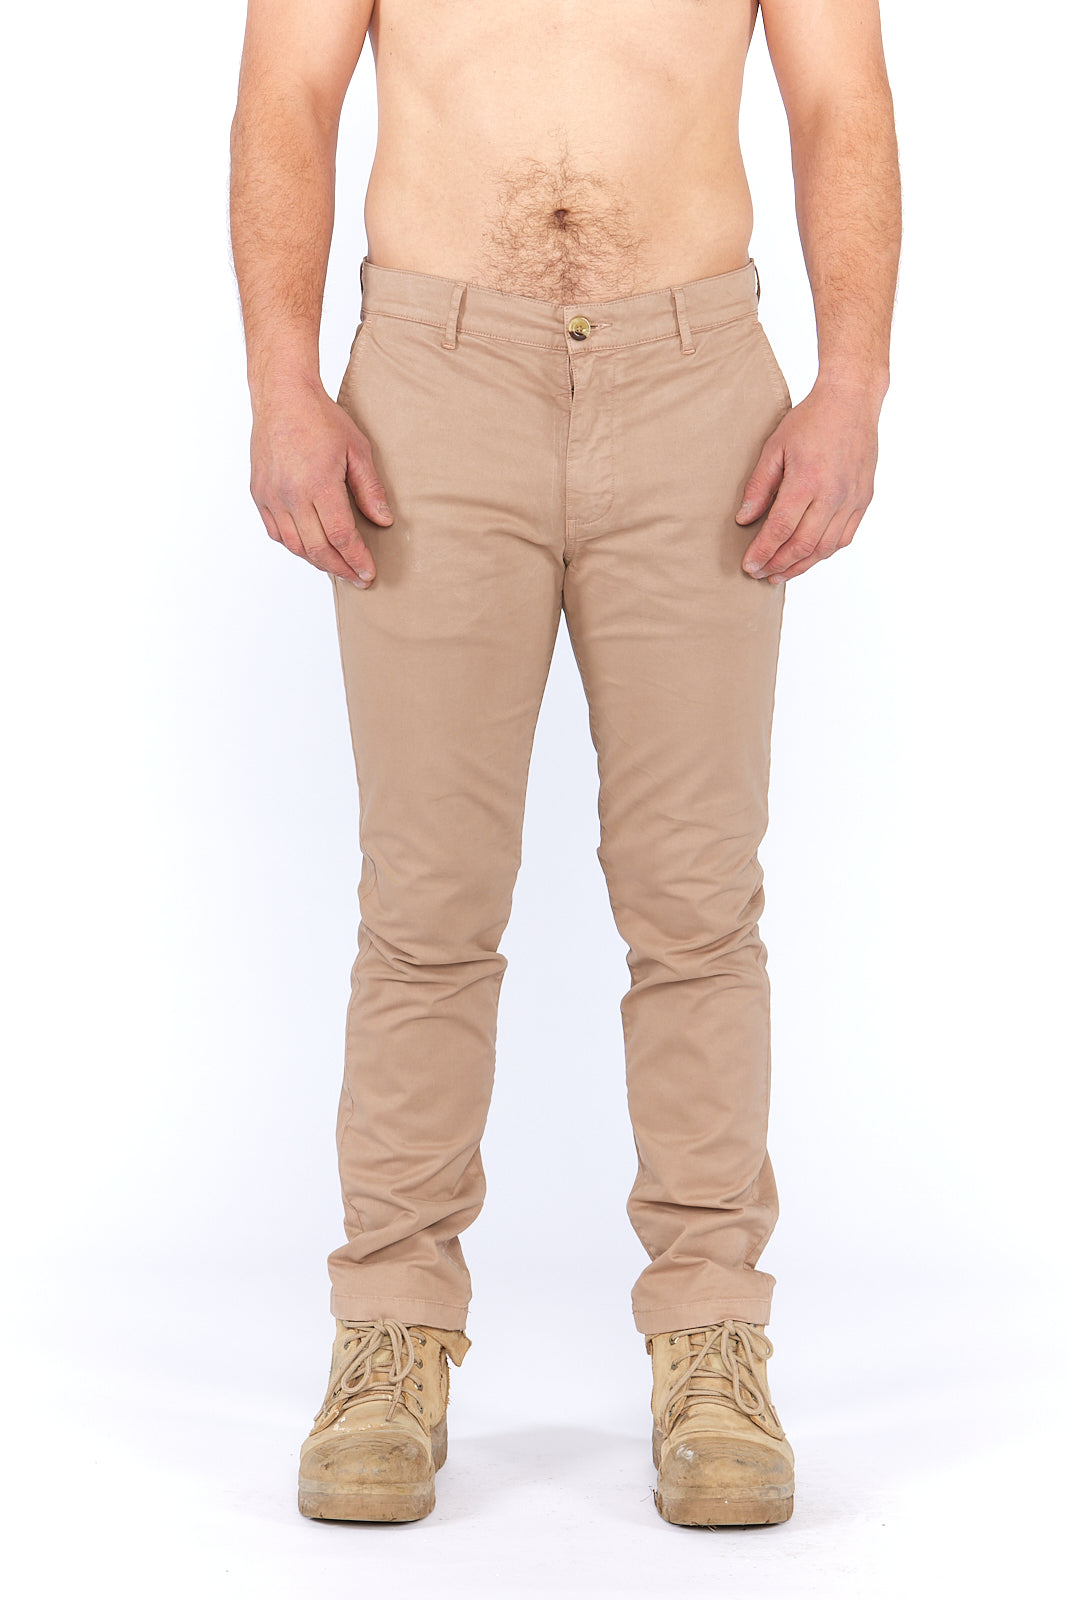 Barry Work Pant